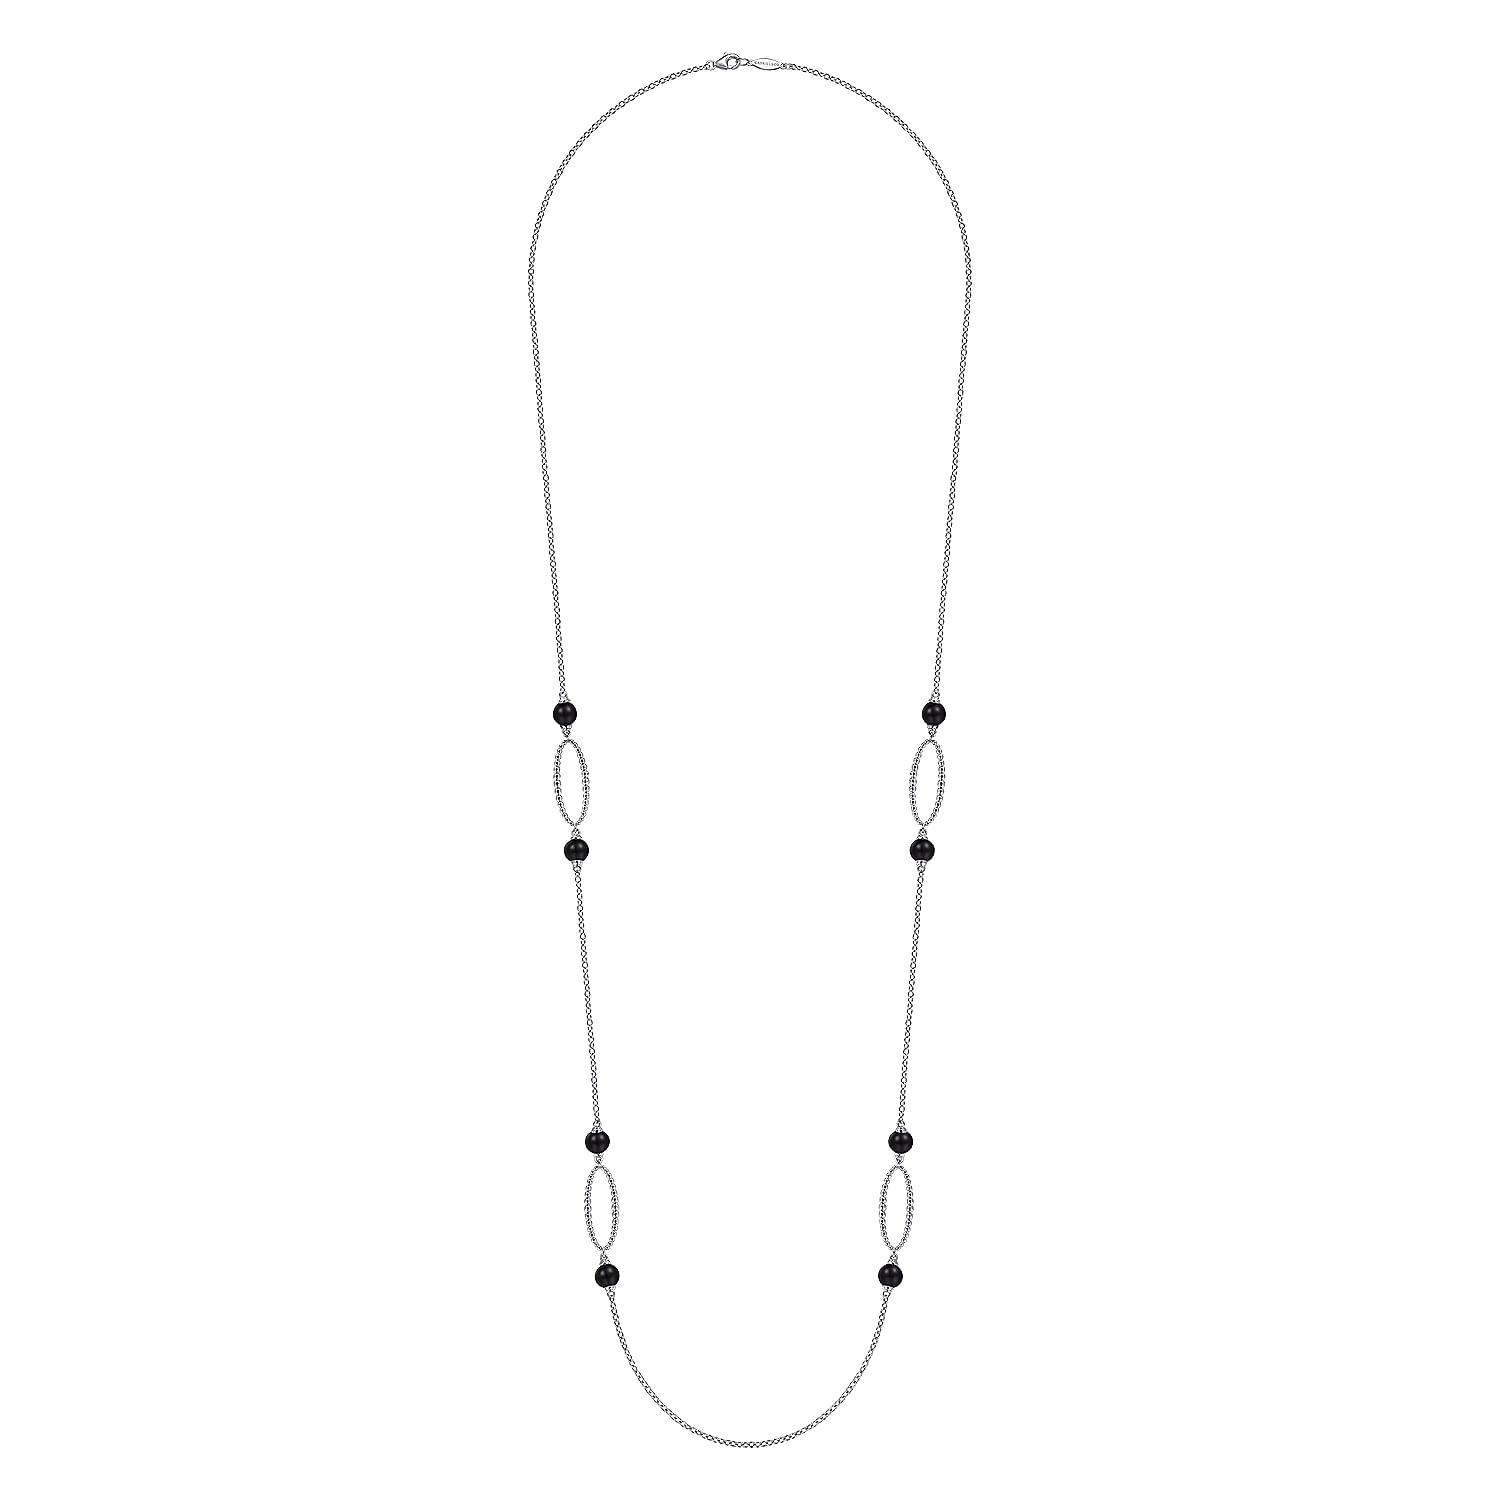 32 inch 925 Sterling Silver Onyx Station Necklace